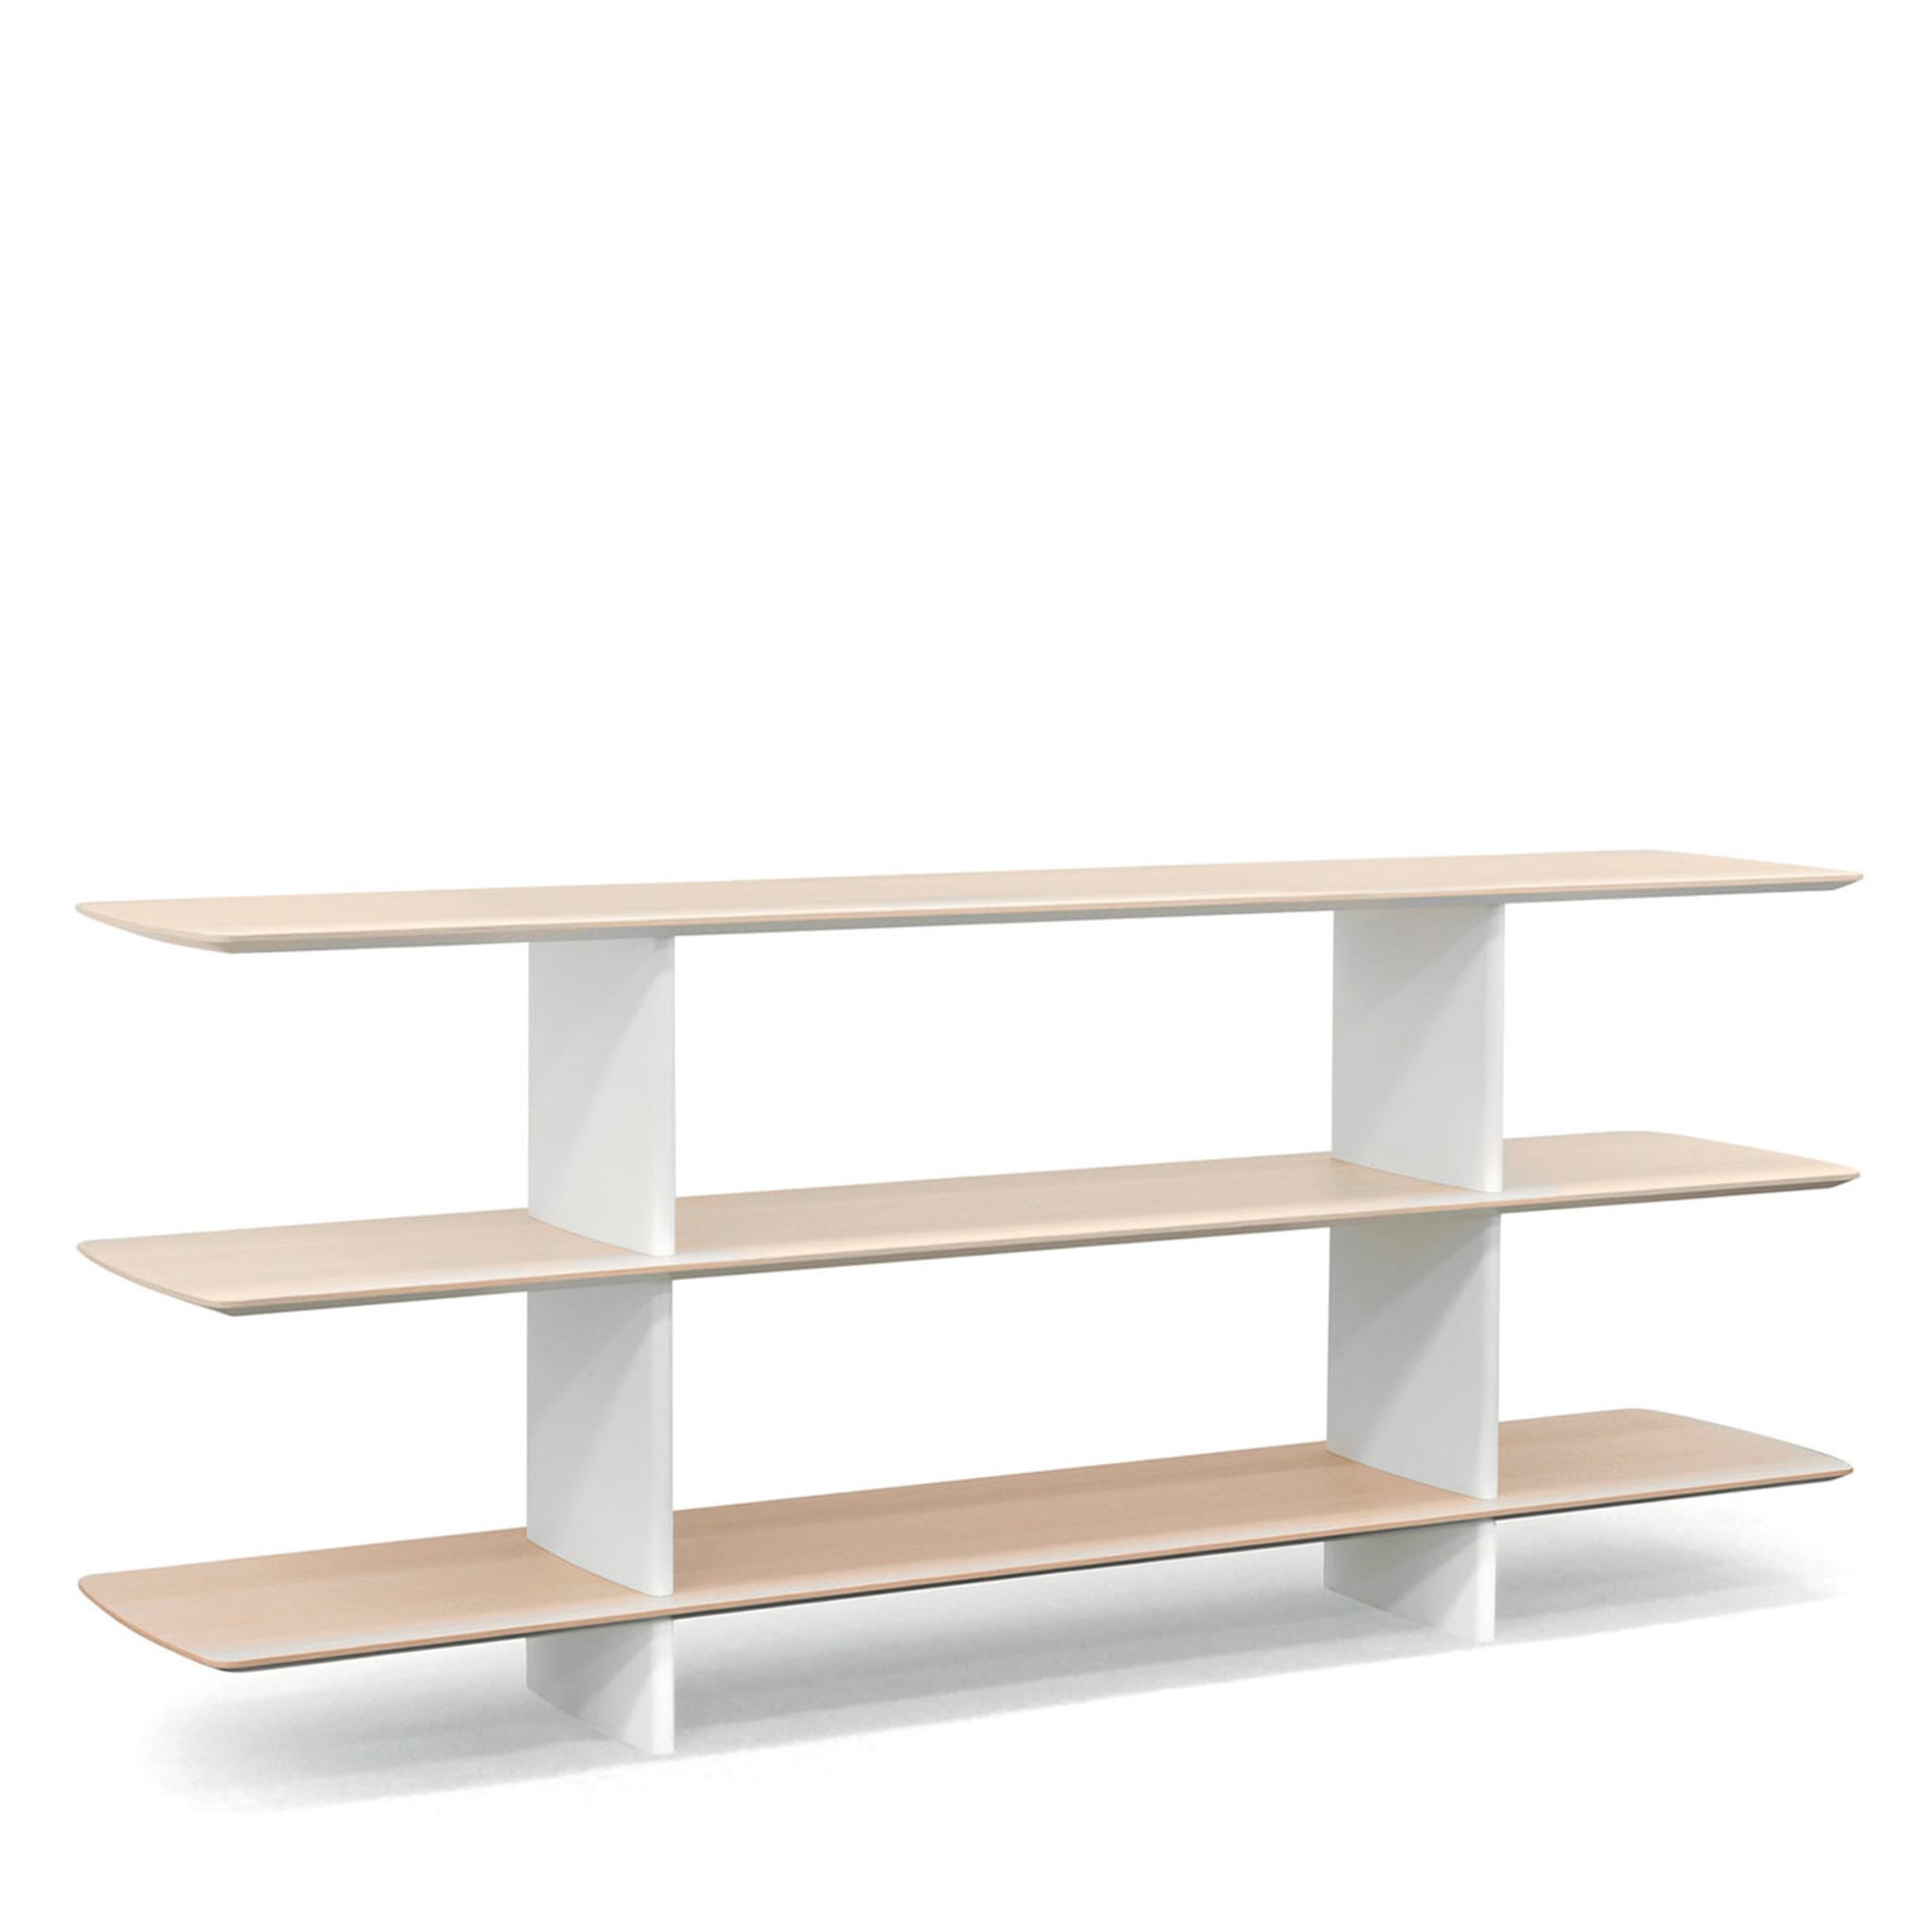 Shift White and Durmast 3-Shelf  Bookcase by Foster + Partners - Alternative view 2